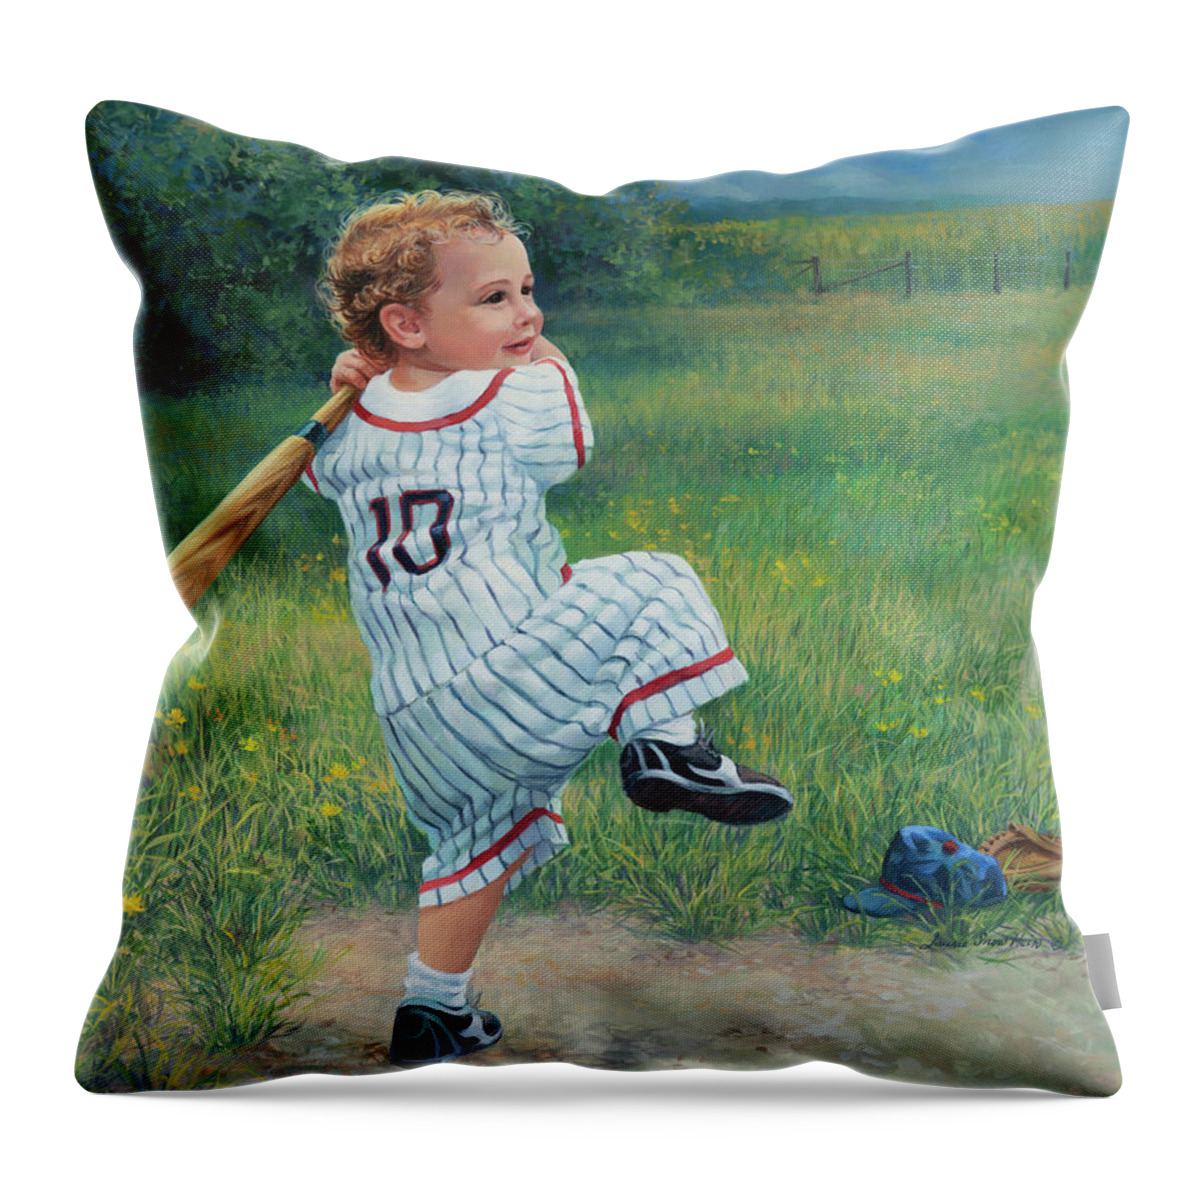 Baseball Throw Pillow featuring the painting Number 10 by Laurie Snow Hein